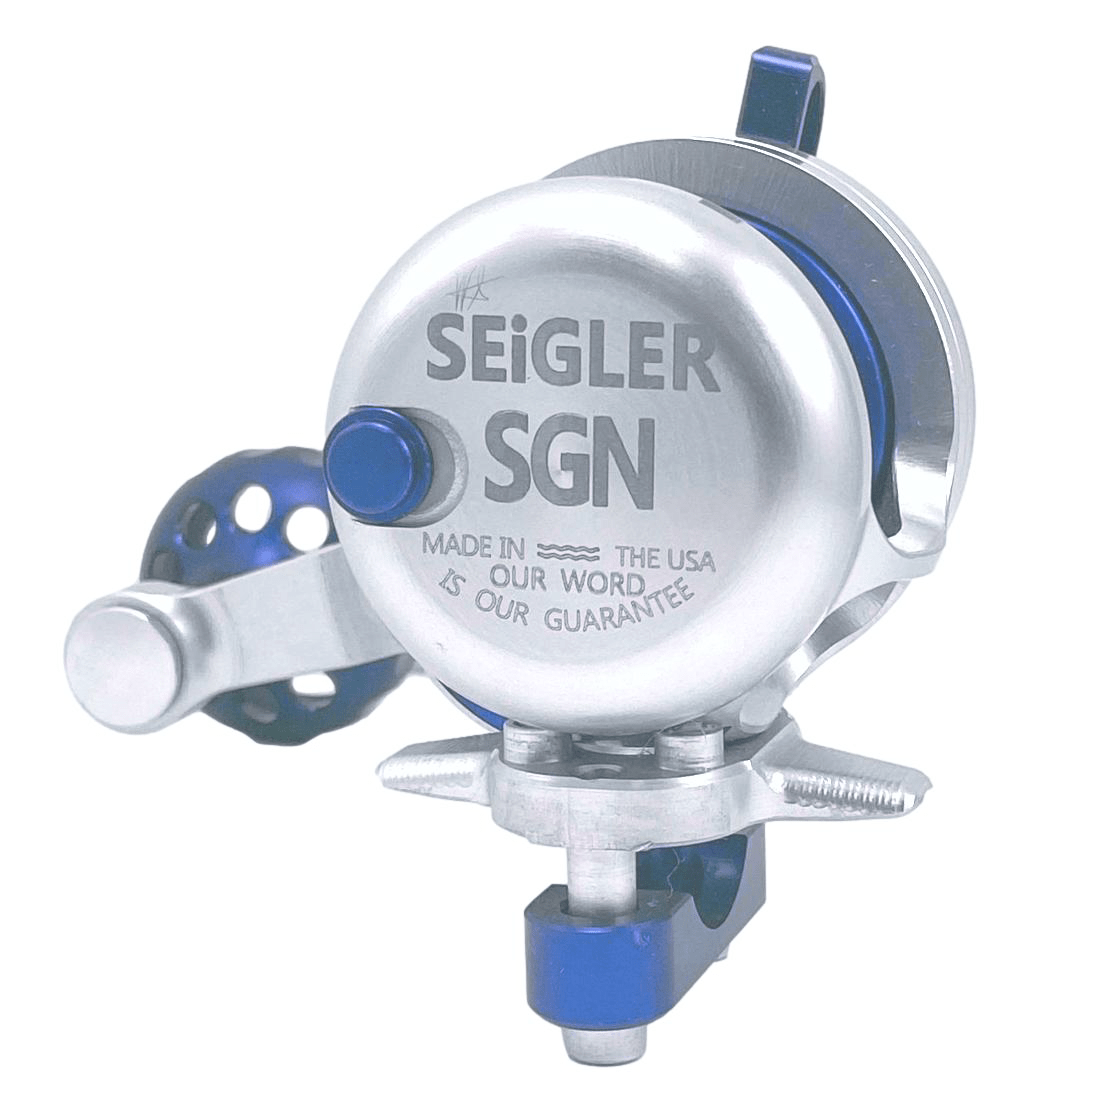 Seigler SGN (Small Game Narrow) Conventional Lever Drag Reels Right / Silver / Blue